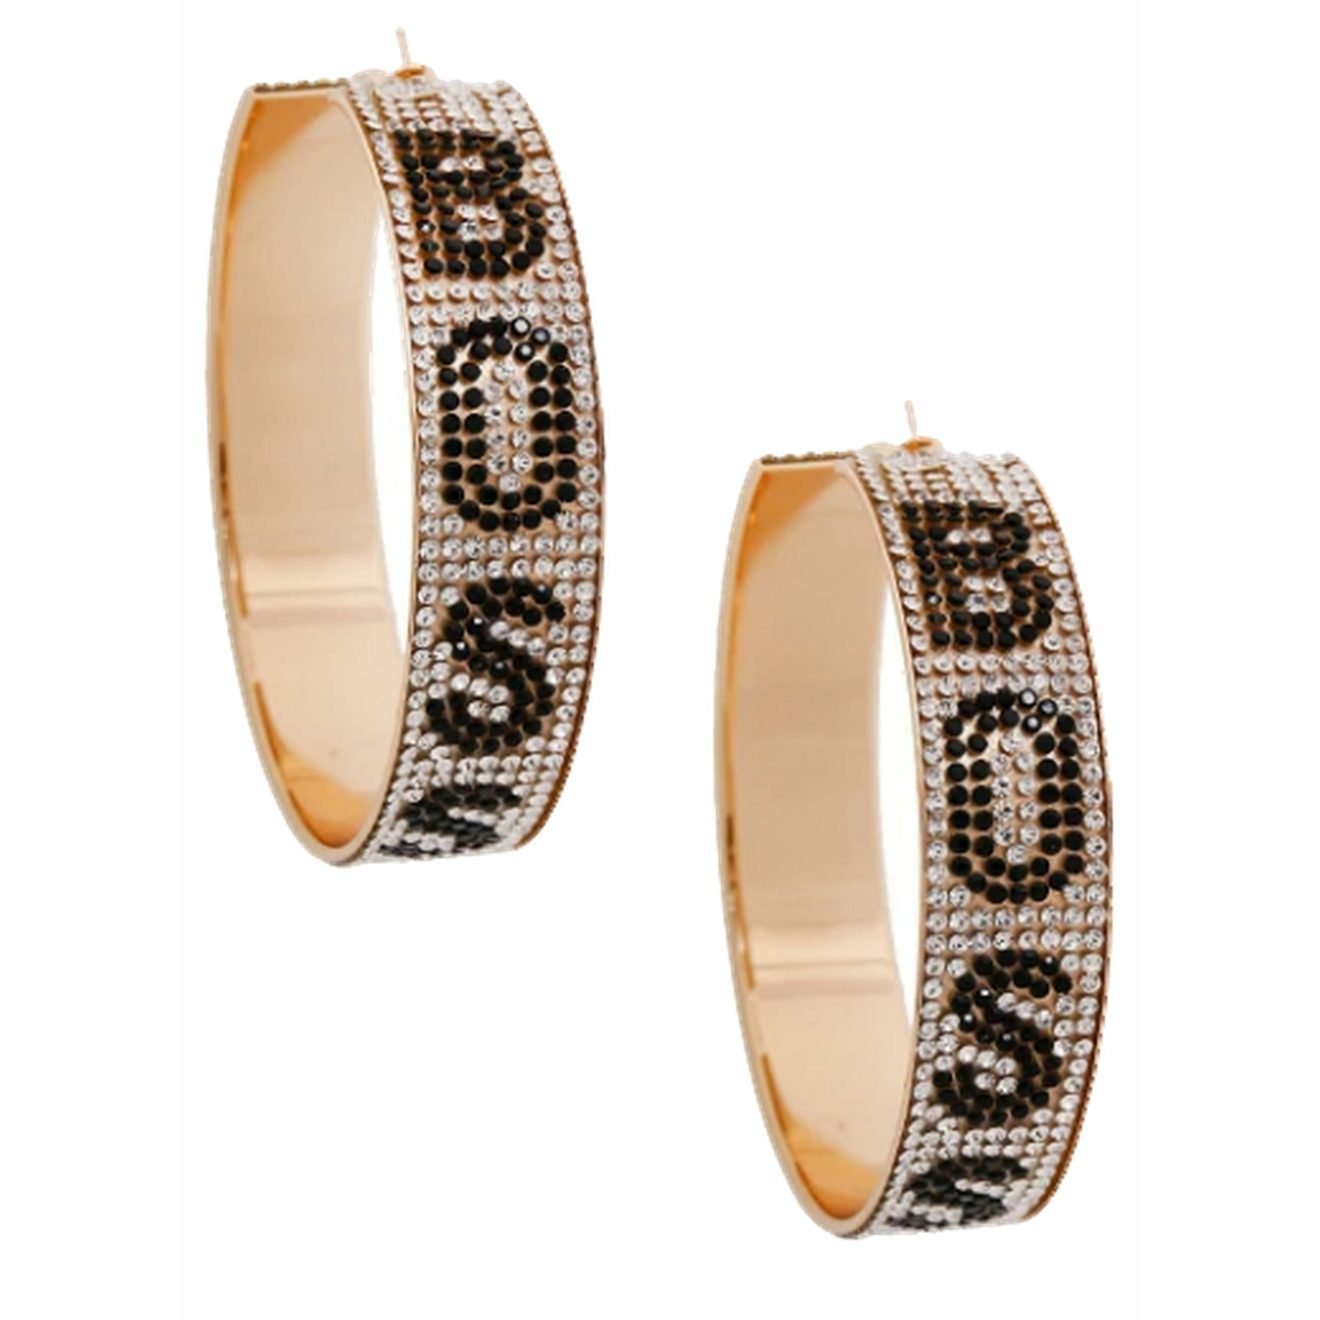 Gold hoop earrings with 'BOSS' rhinestone detailing, perfect for a casual style statement.